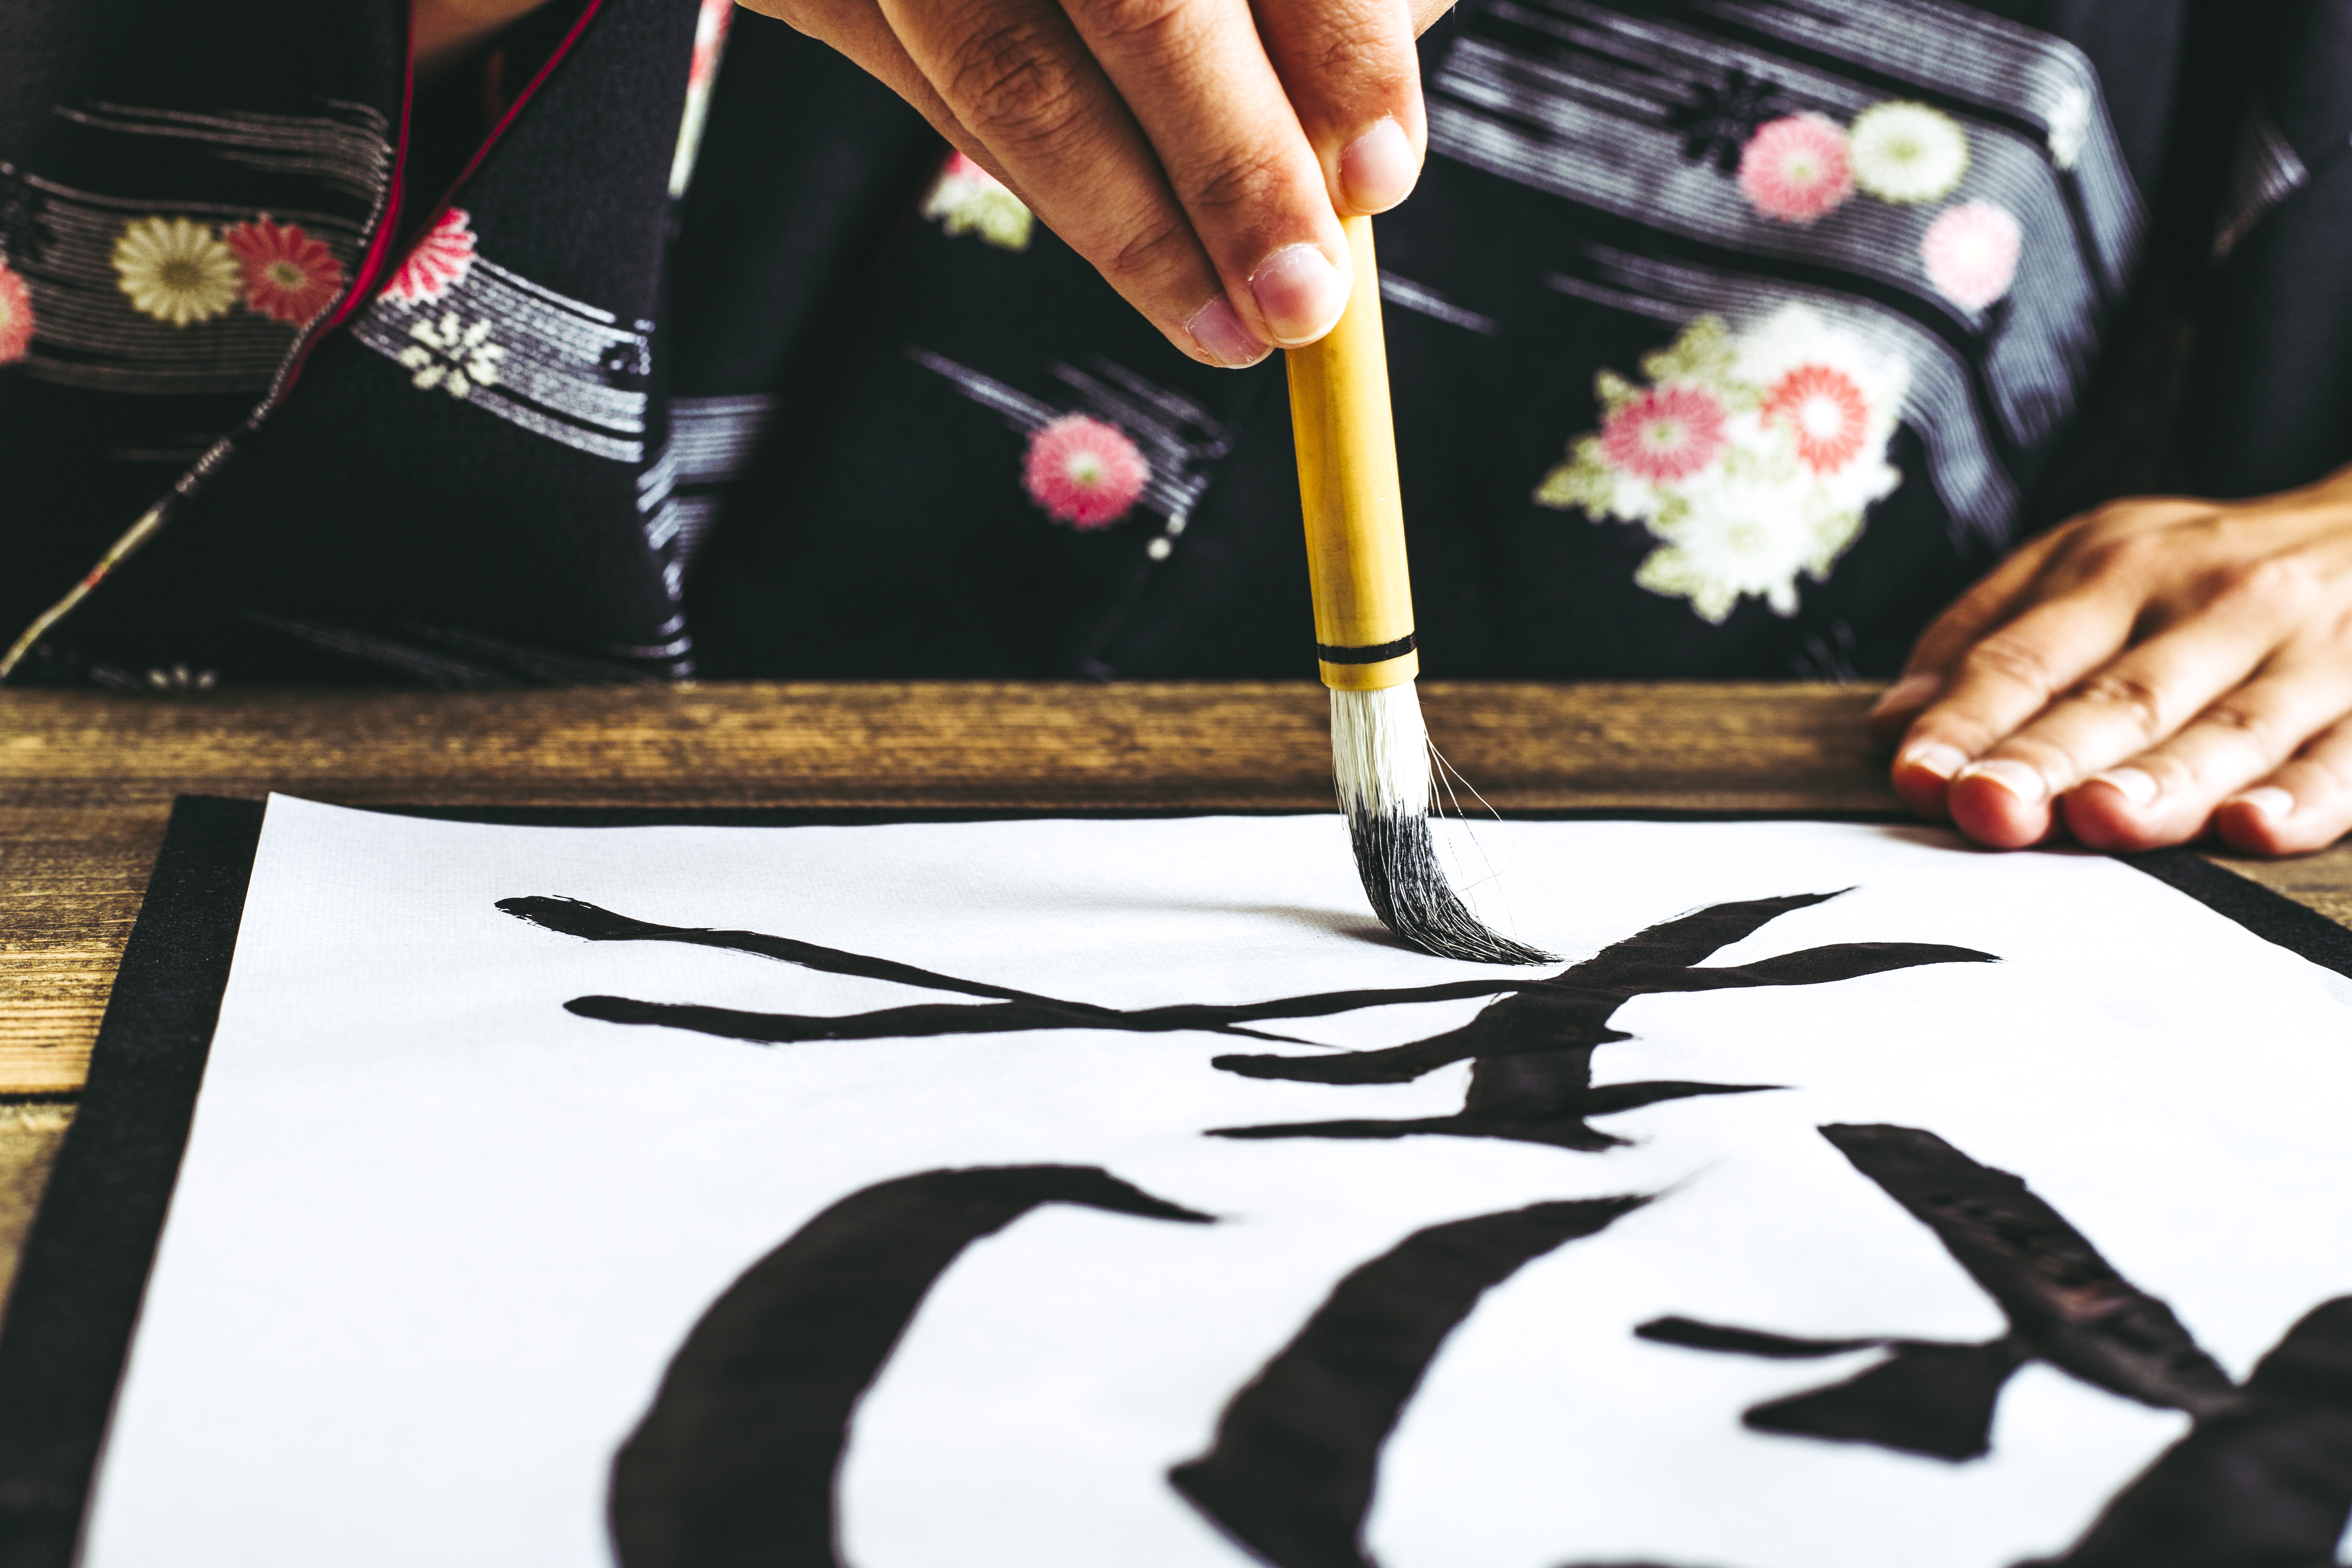 Learn about Japanese language and culture when you study abroad in Japan with The Experiment. Develop your skills through Japanese language immersion, exploring vibrant Tokyo neighborhoods, and living with a Japanese homestay family.  Japanese calligraphy